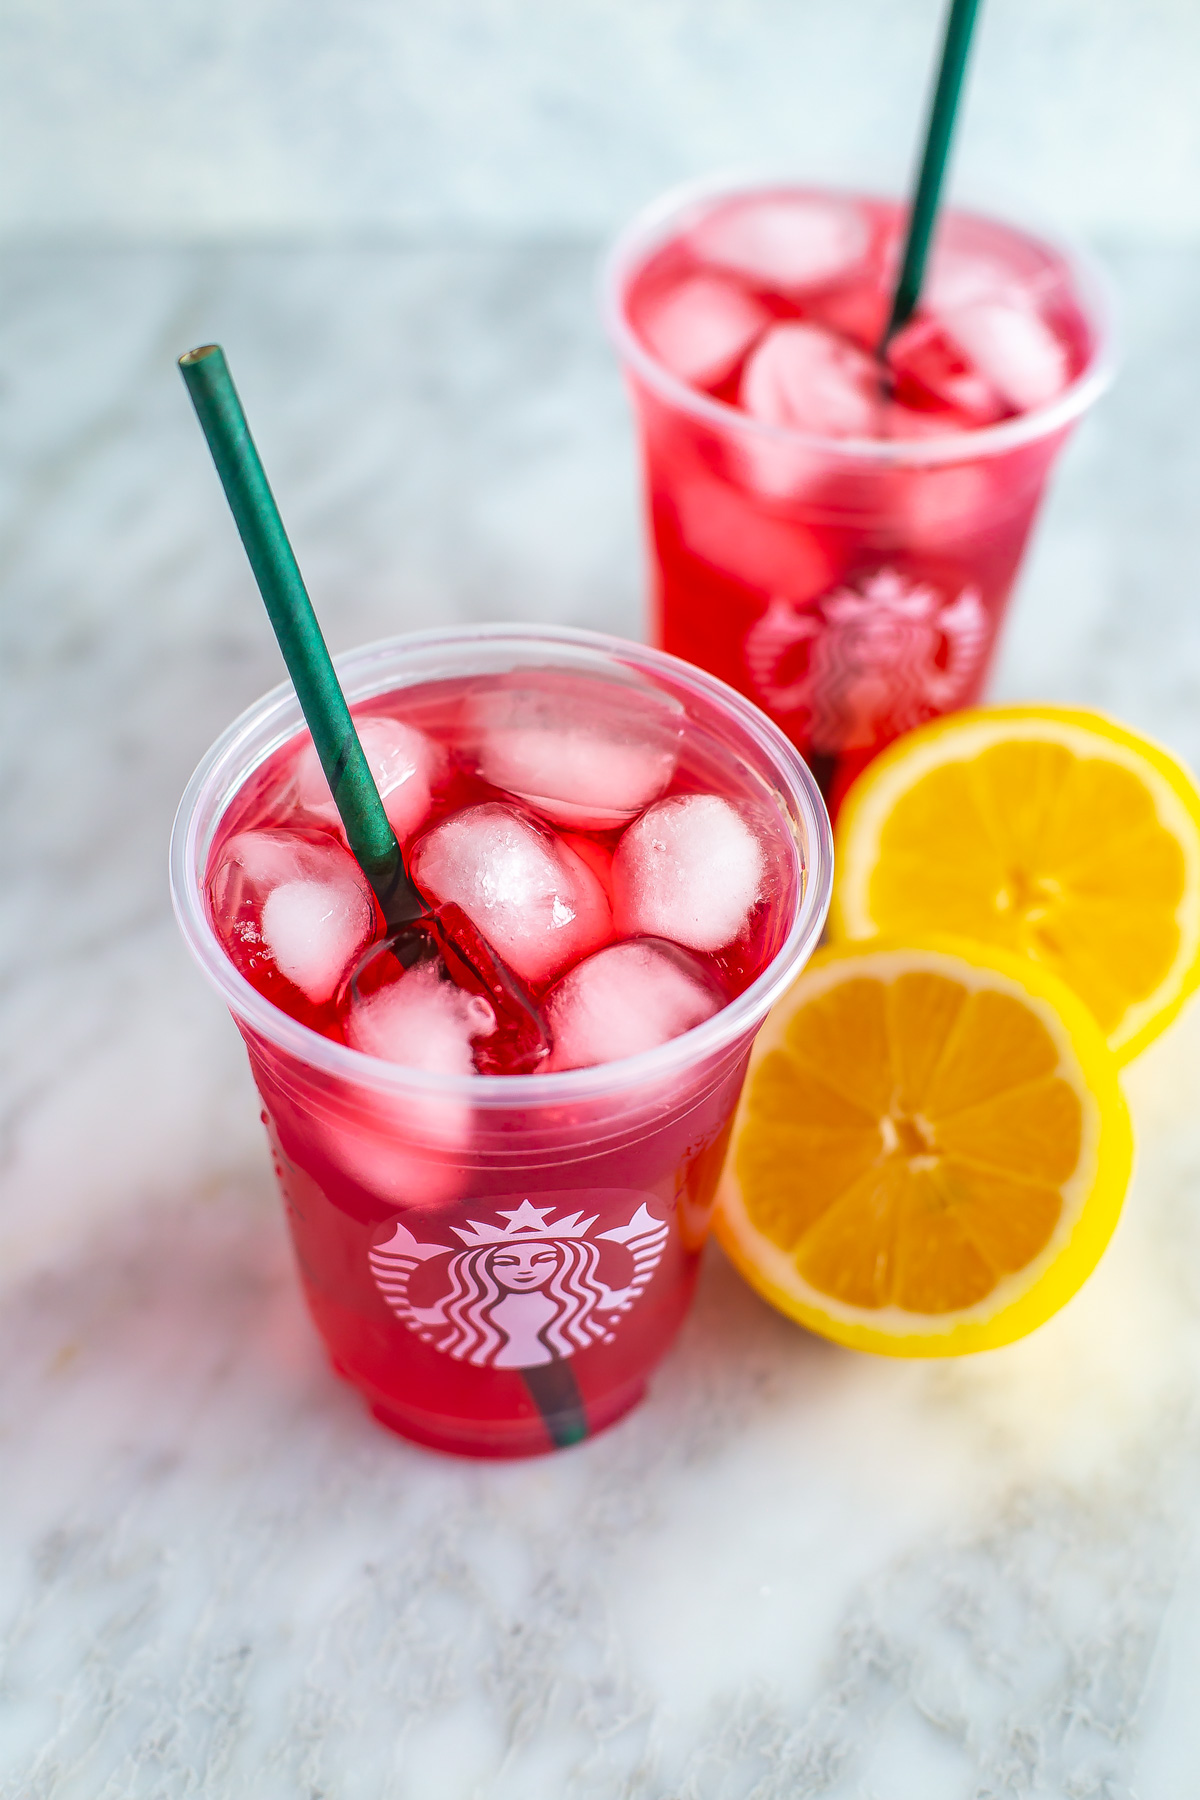 An overhead view of two cups of homemade Starbucks passion tea lemonade.